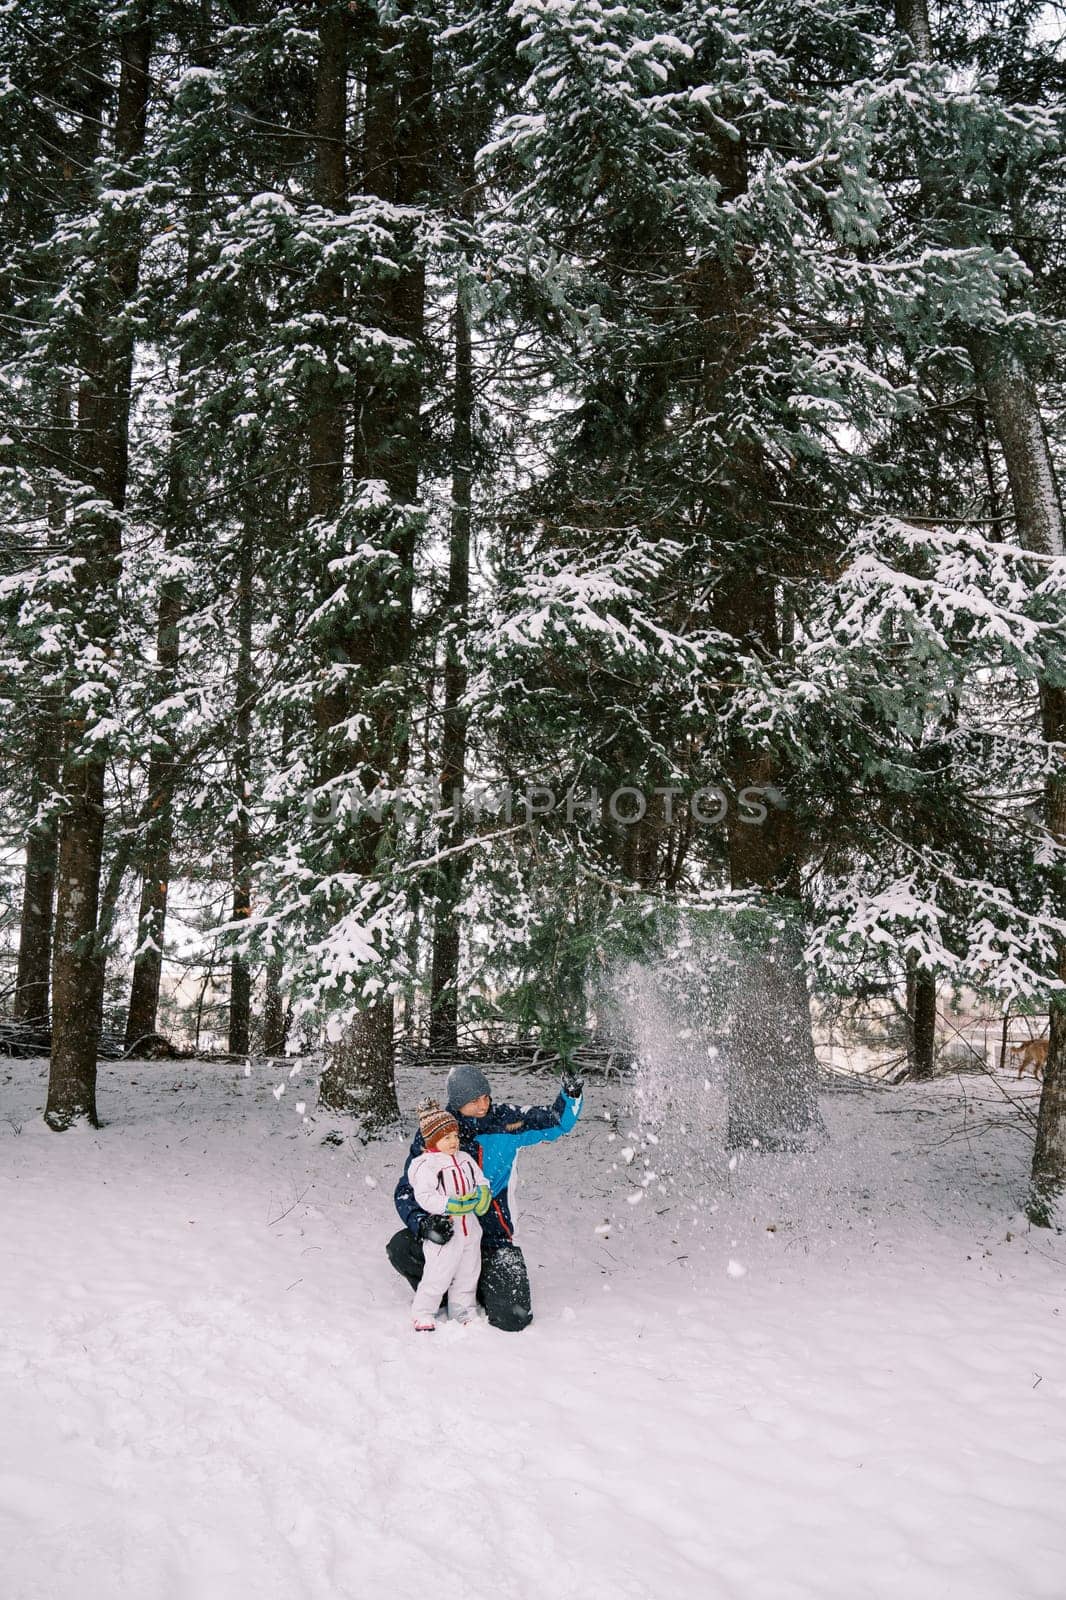 Dad squatted hugging a small child under snowfall in a snowy forest by Nadtochiy